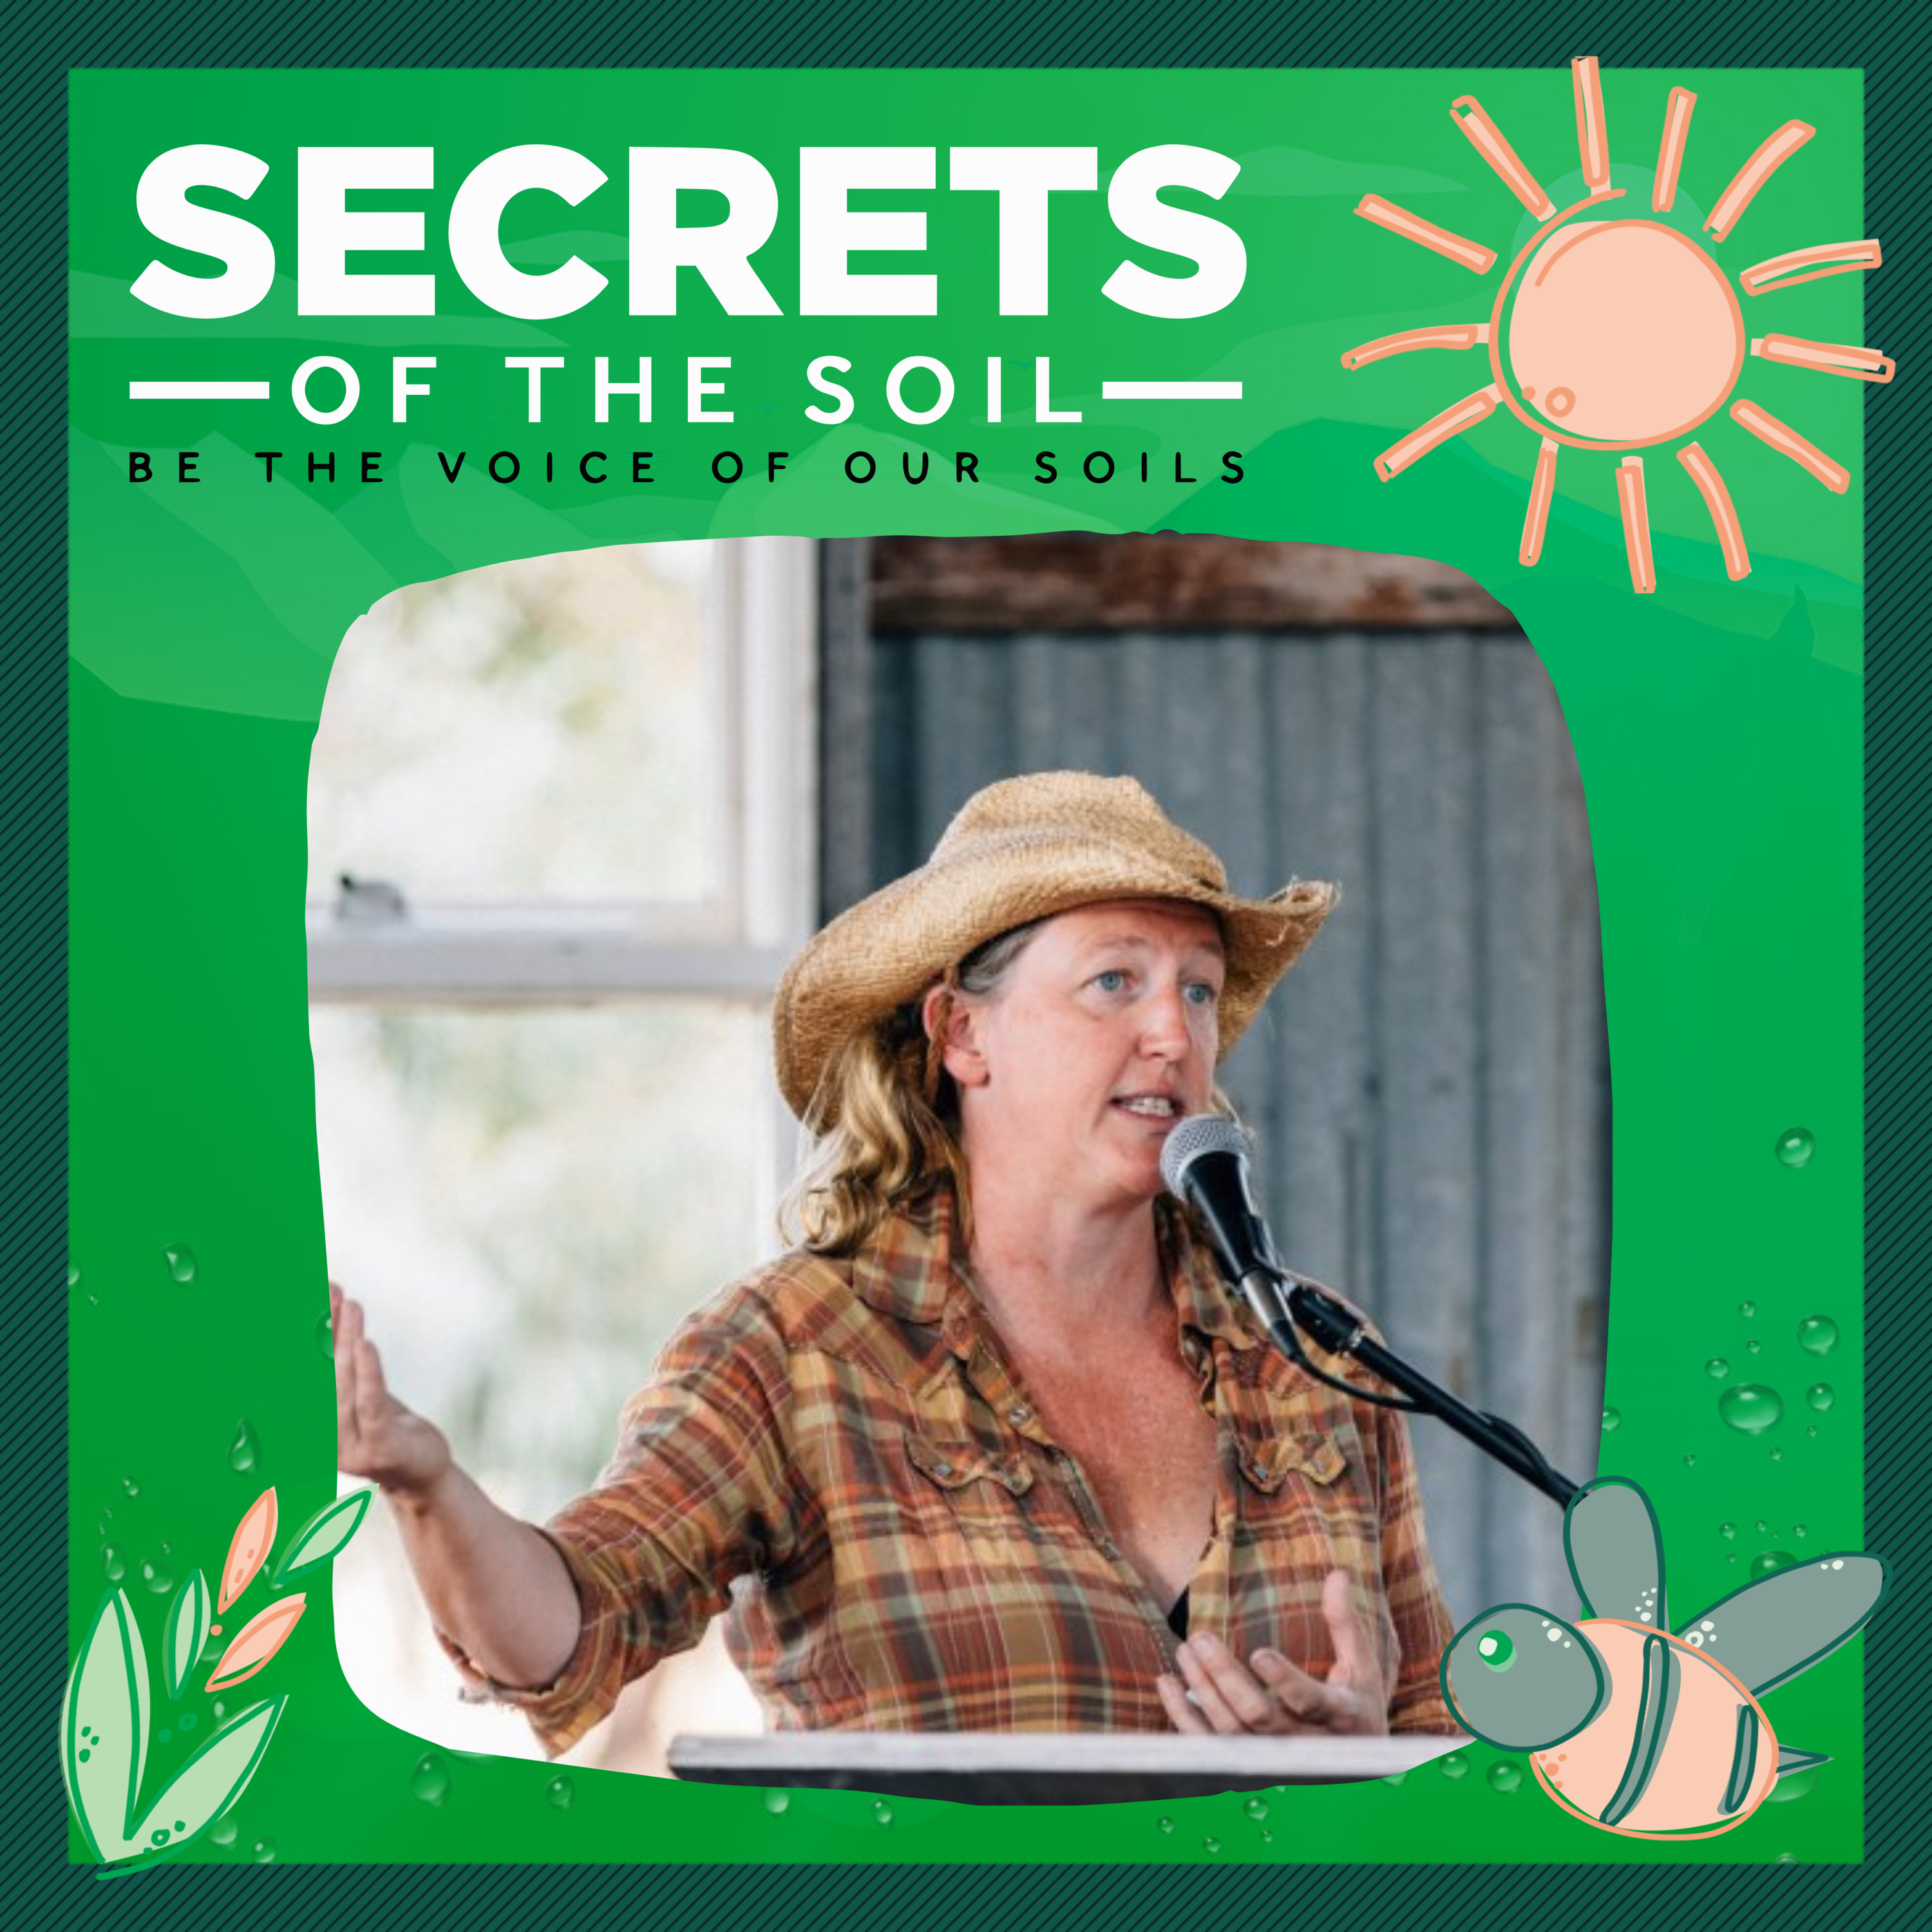 10: Understanding Agroecology & The Ground Up Approach to Food Sovereignty With Tammi Jonas